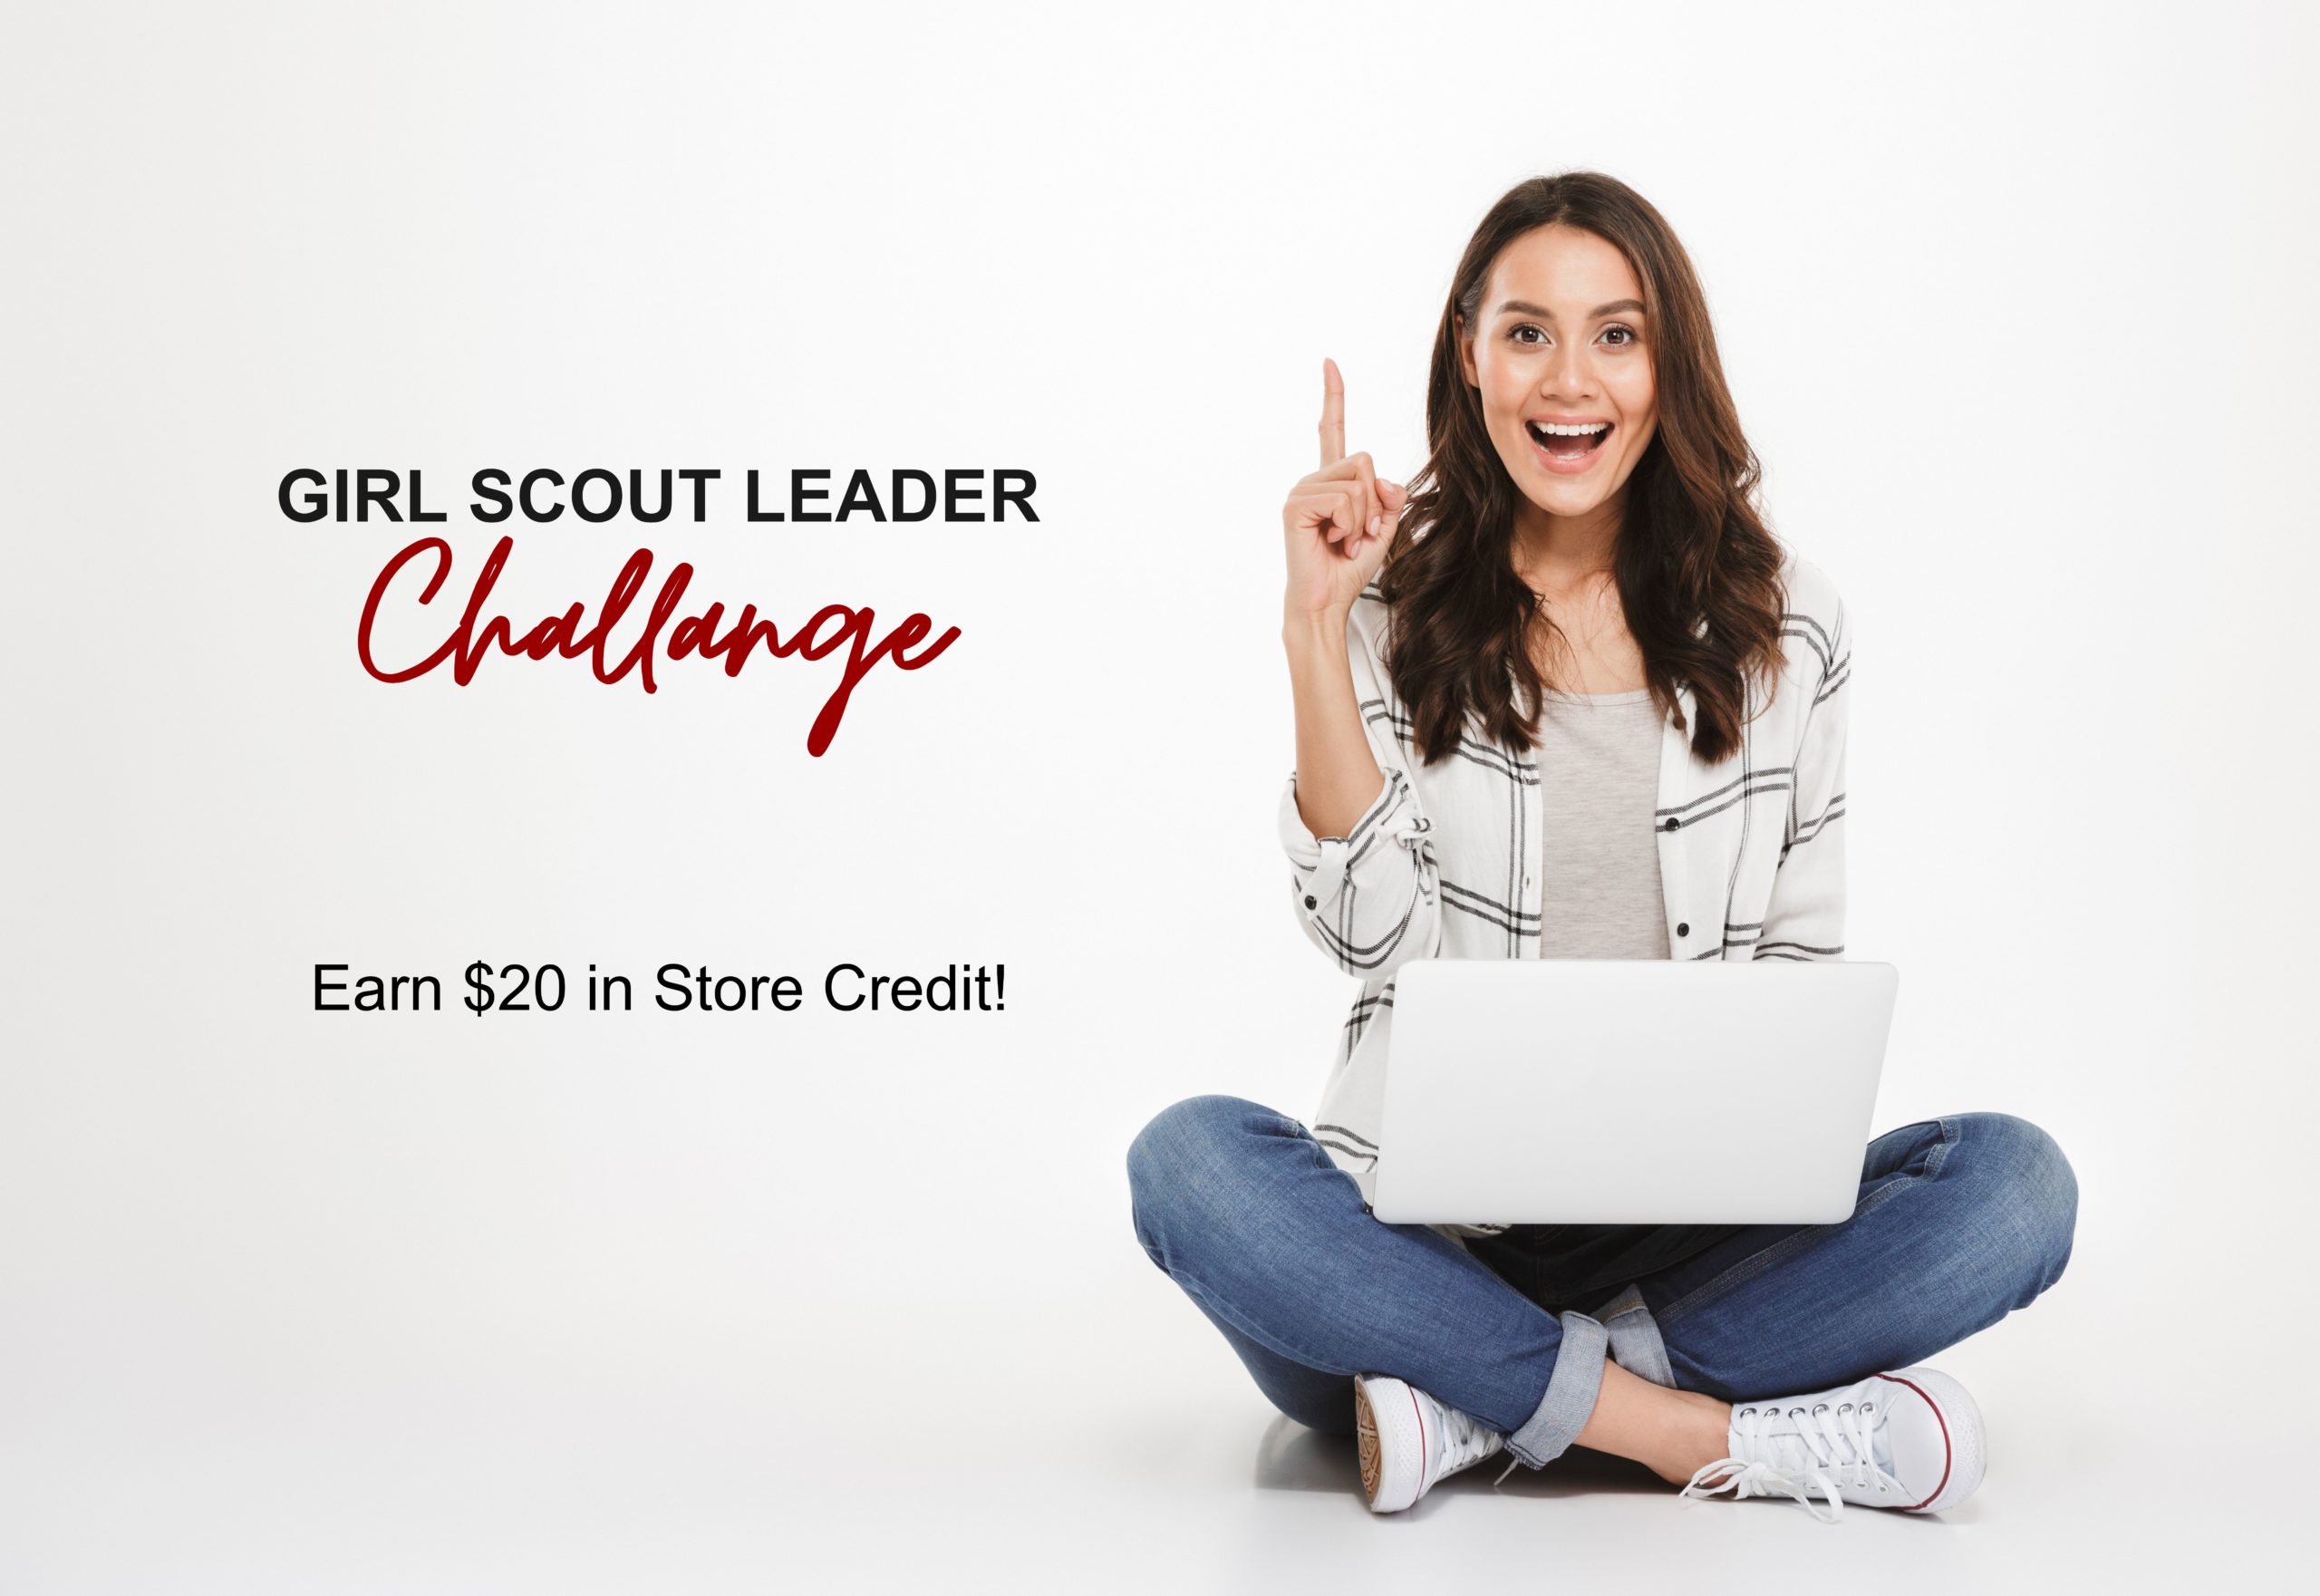 Earn Store Credit